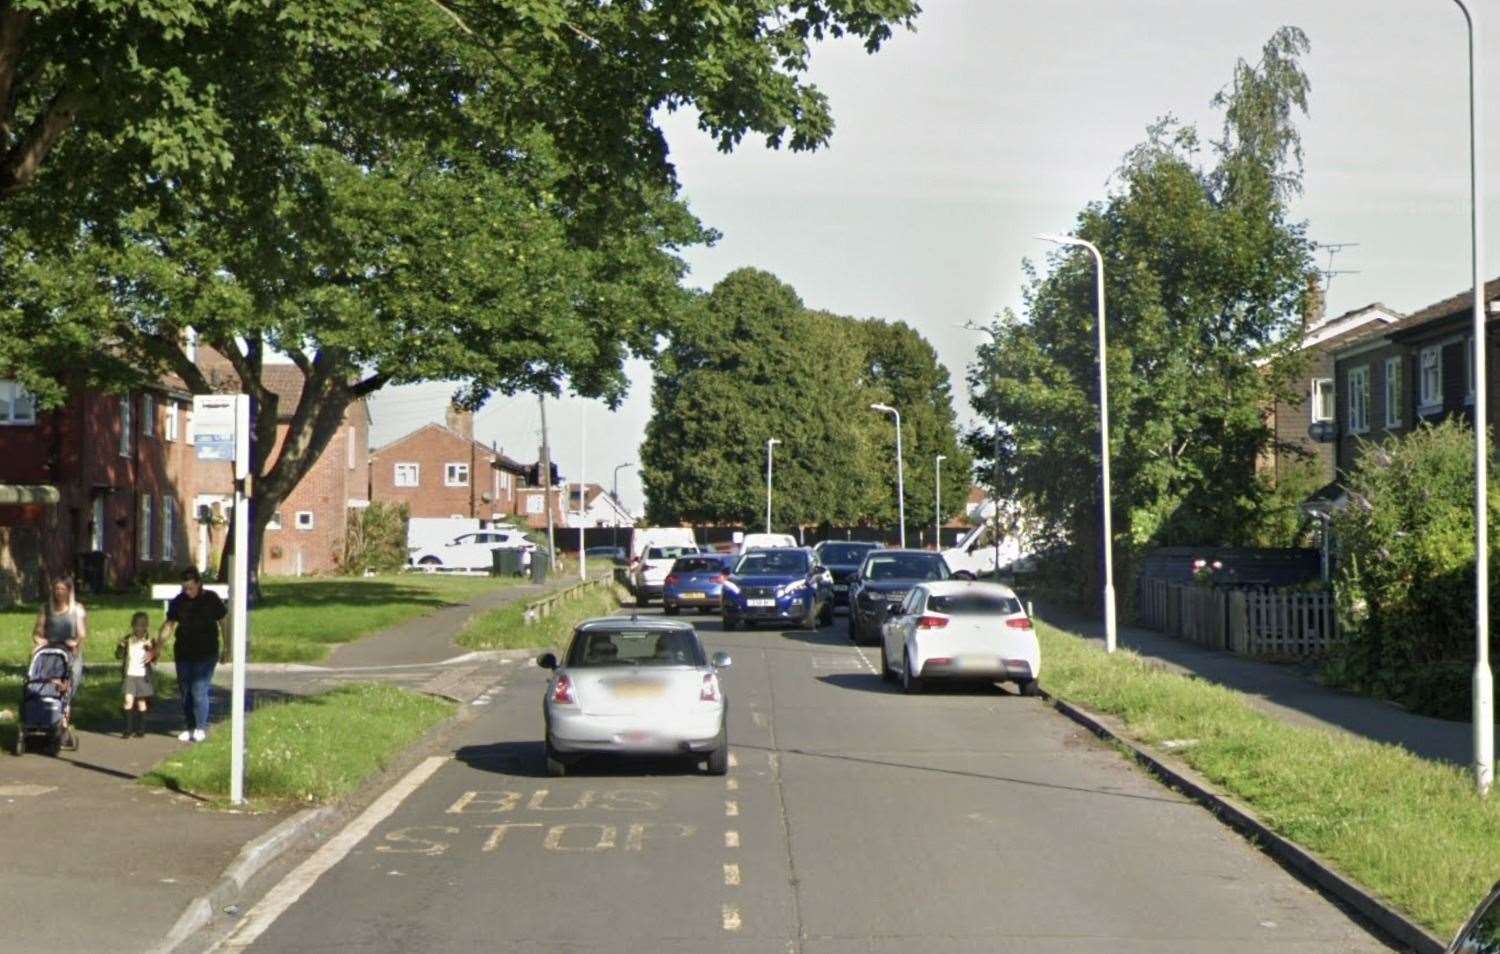 The incident happened along Osbourne Road in Willesborough. Picture: Google